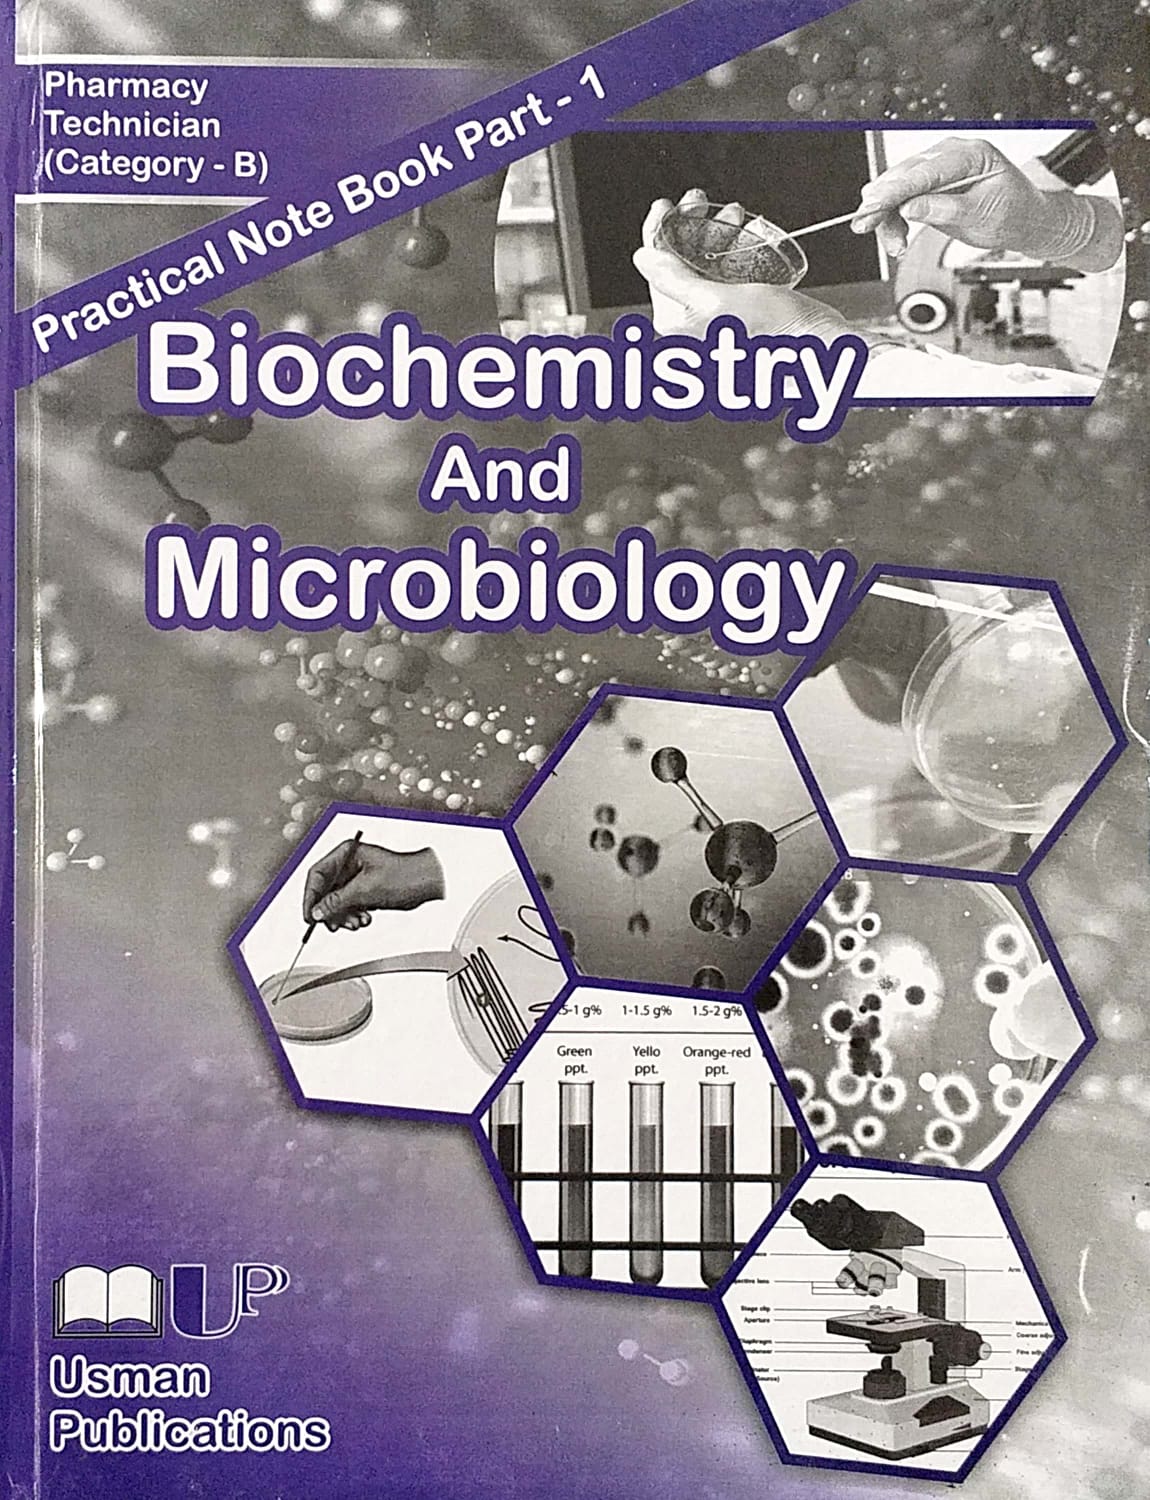 PRACTICAL NOTEBOOK part 1 biochemistry and microbiology